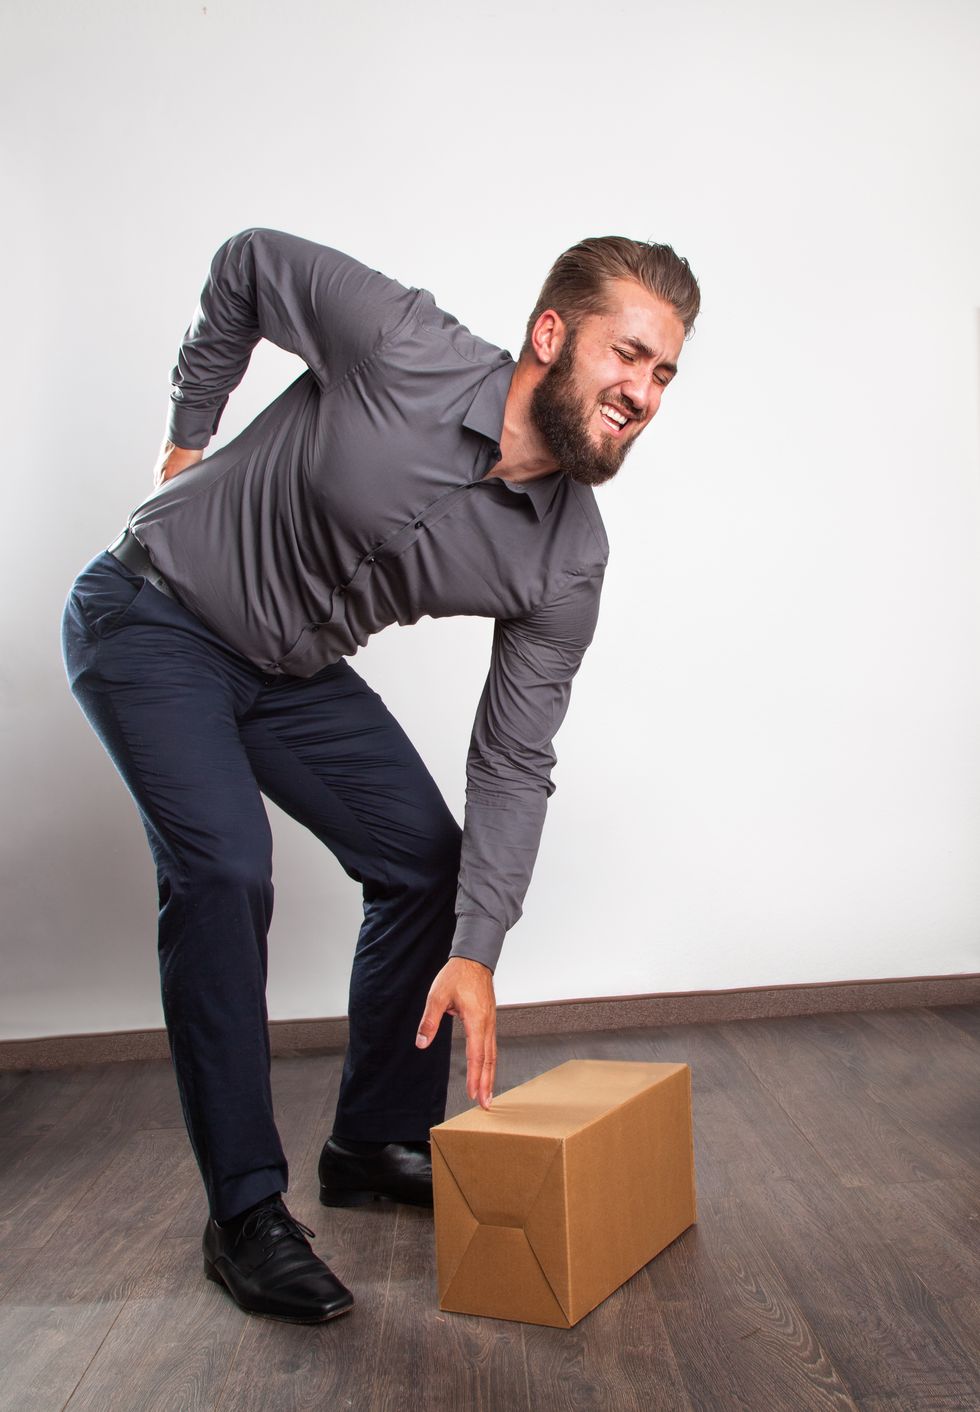 Man With Backache Reaching Box While Bending Against White Wall